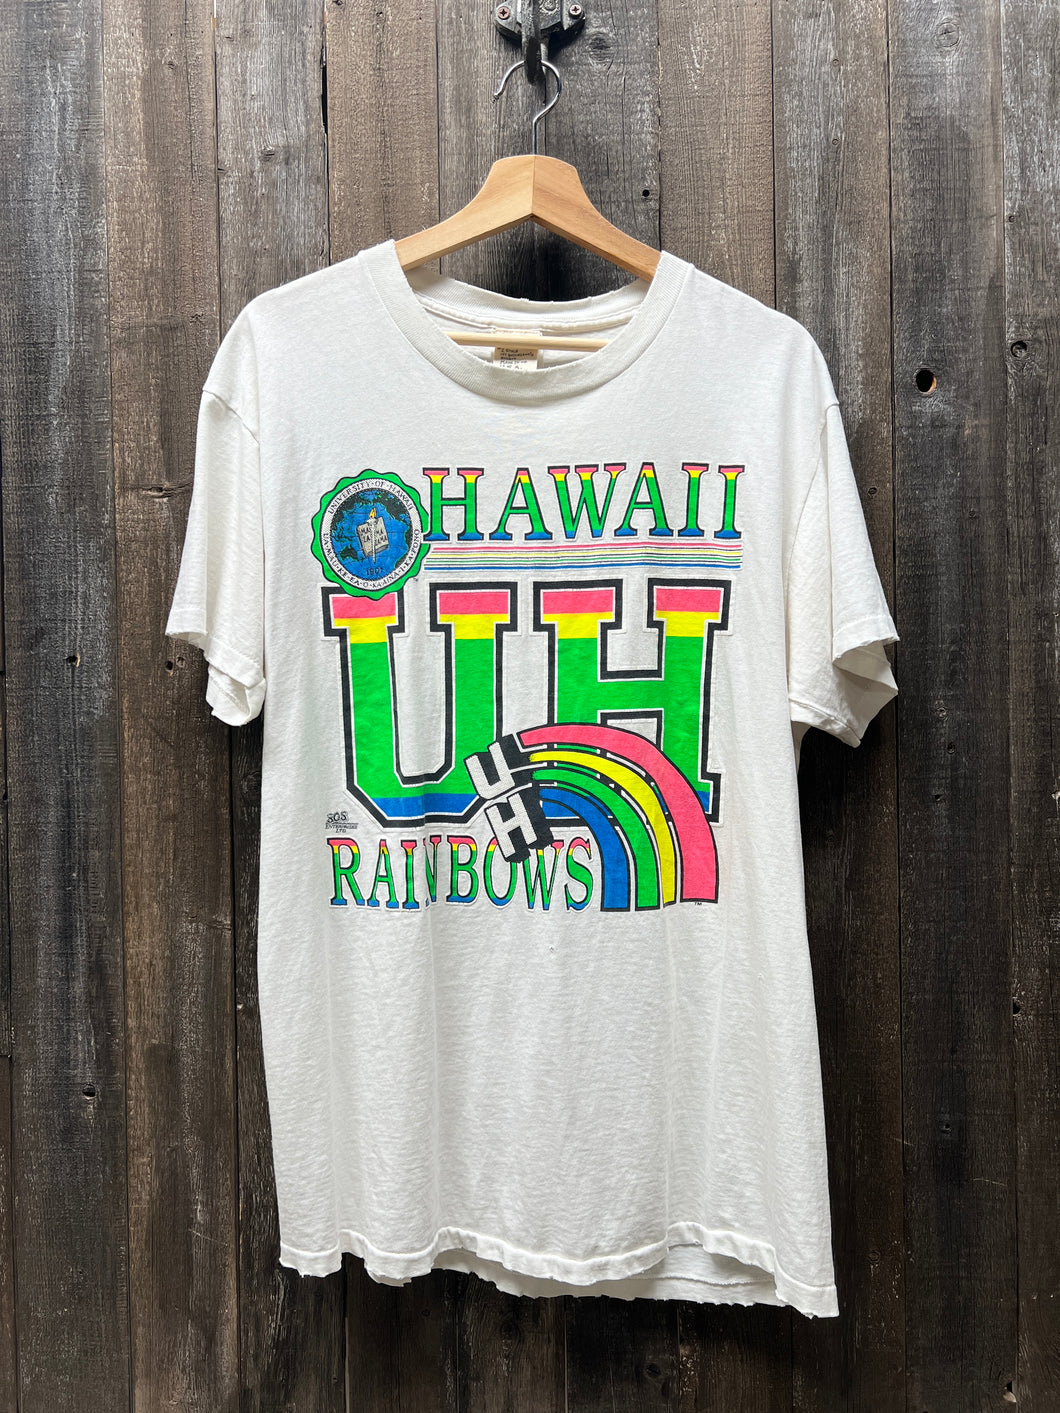 Hawaii UH Rainbows Tee-M/L-Customize Your Embroidery Wording